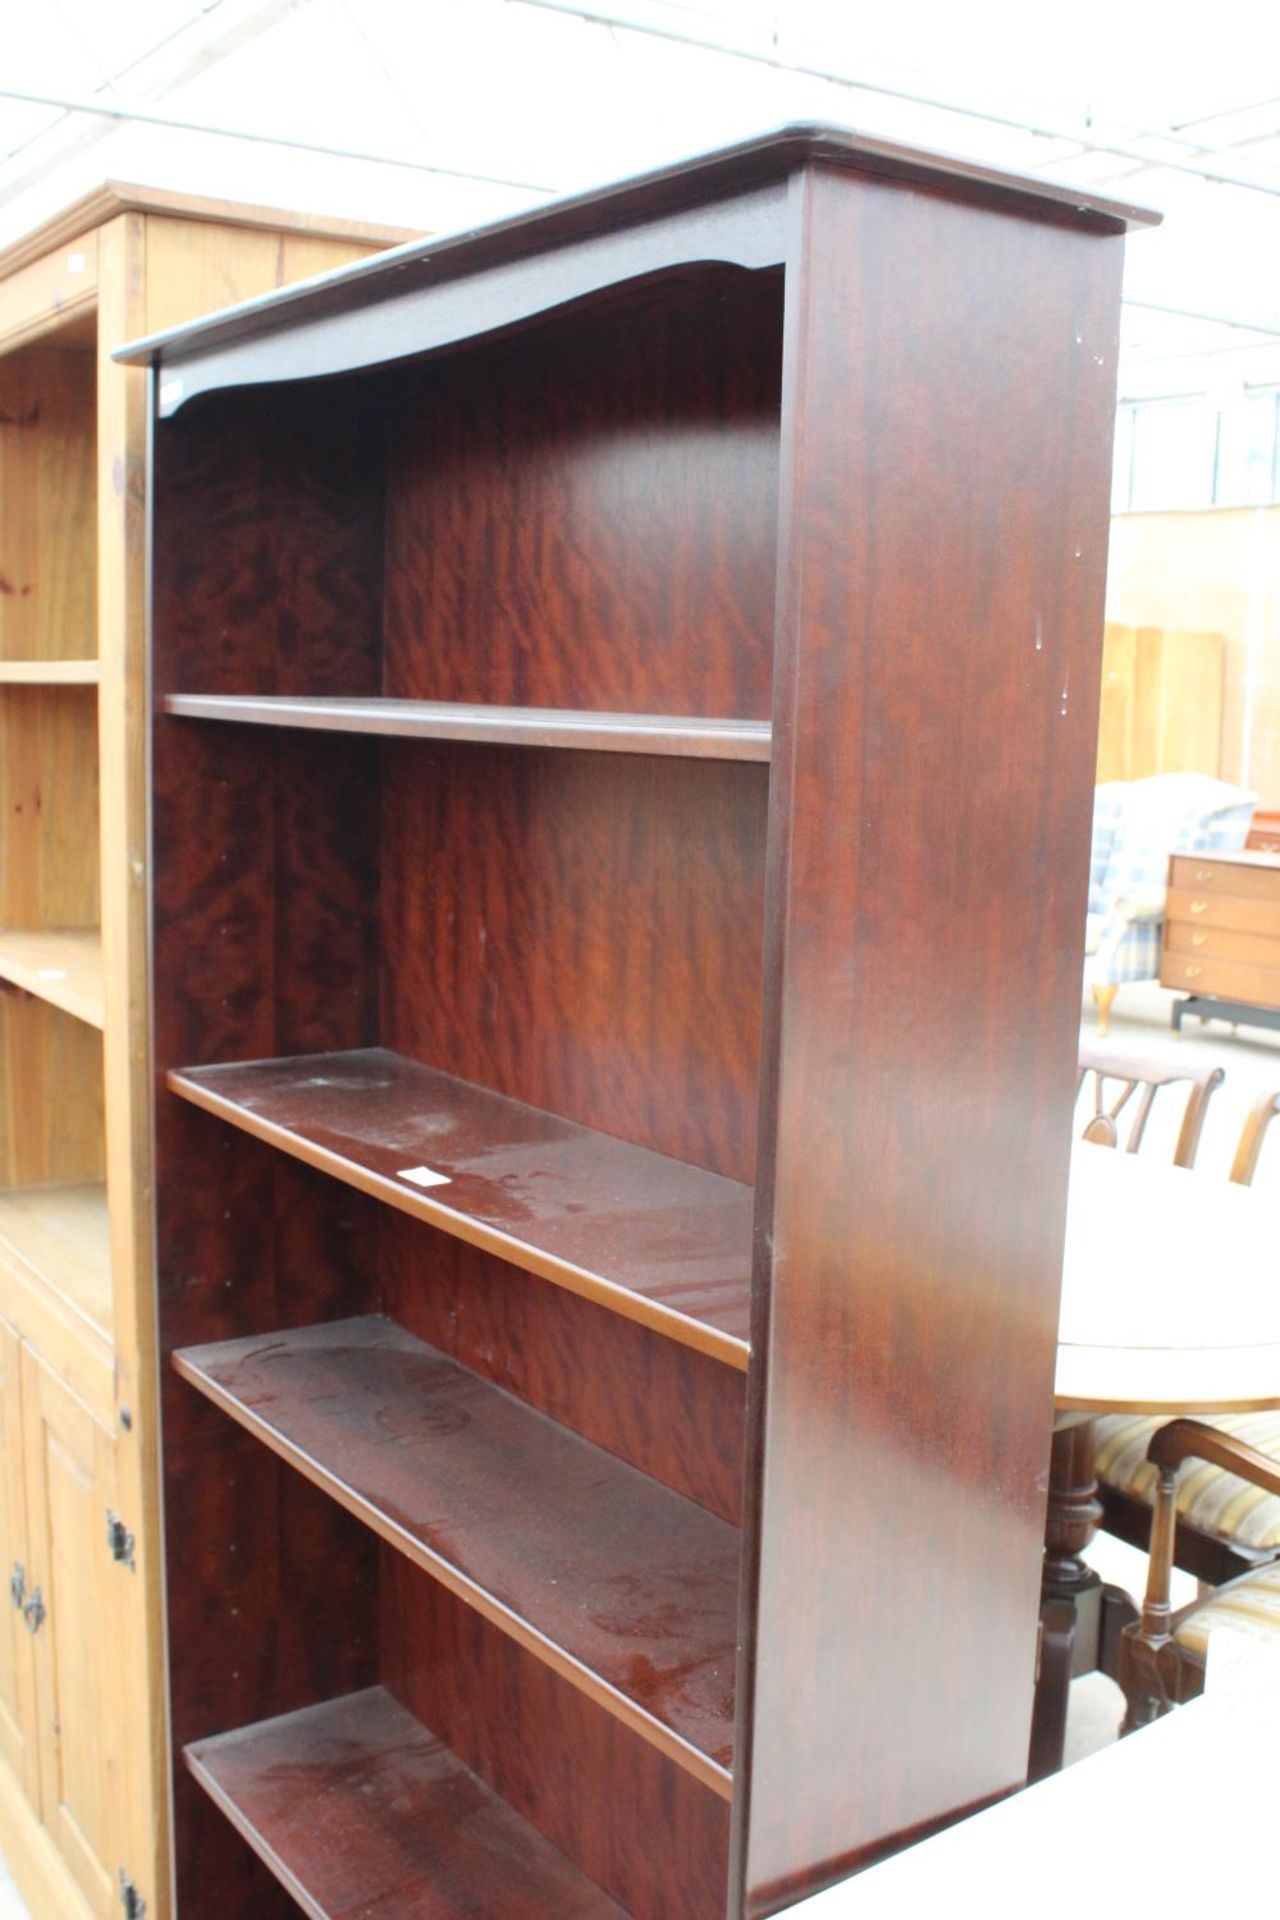 A MODERN FIVE TIER OPEN STAG BOOKCASE, 35" WIDE - Image 2 of 3